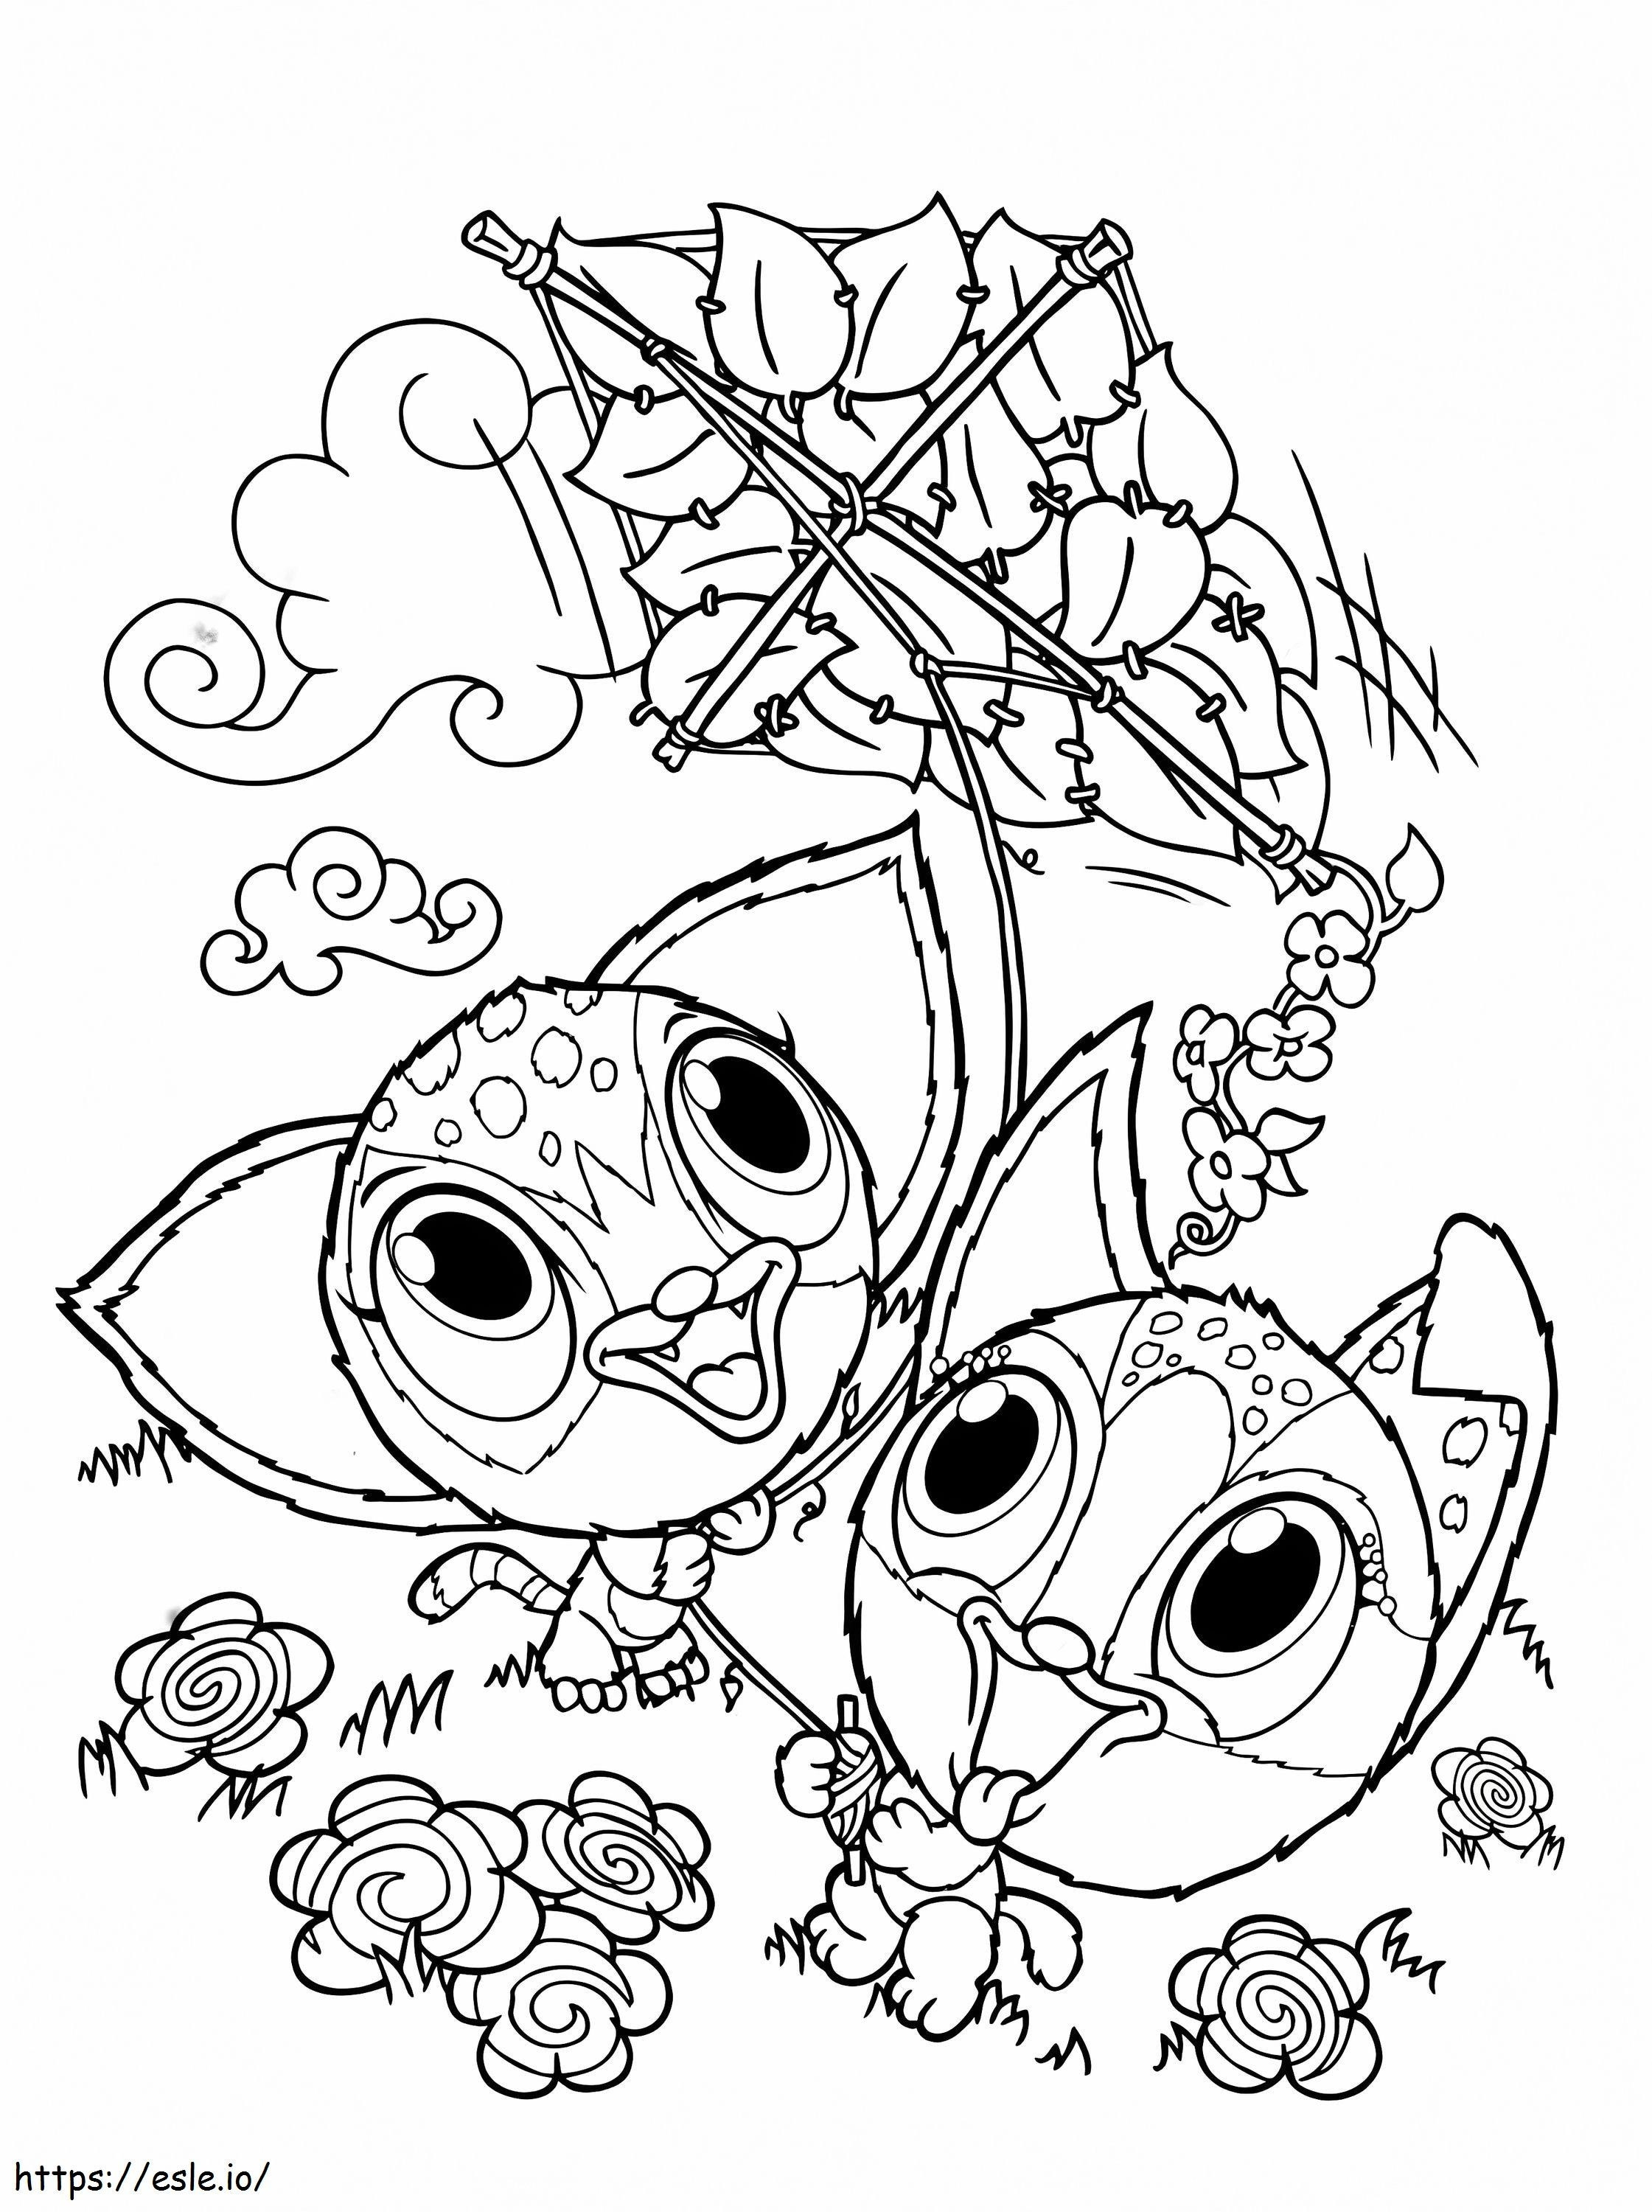 Lovely Zoobles coloring page